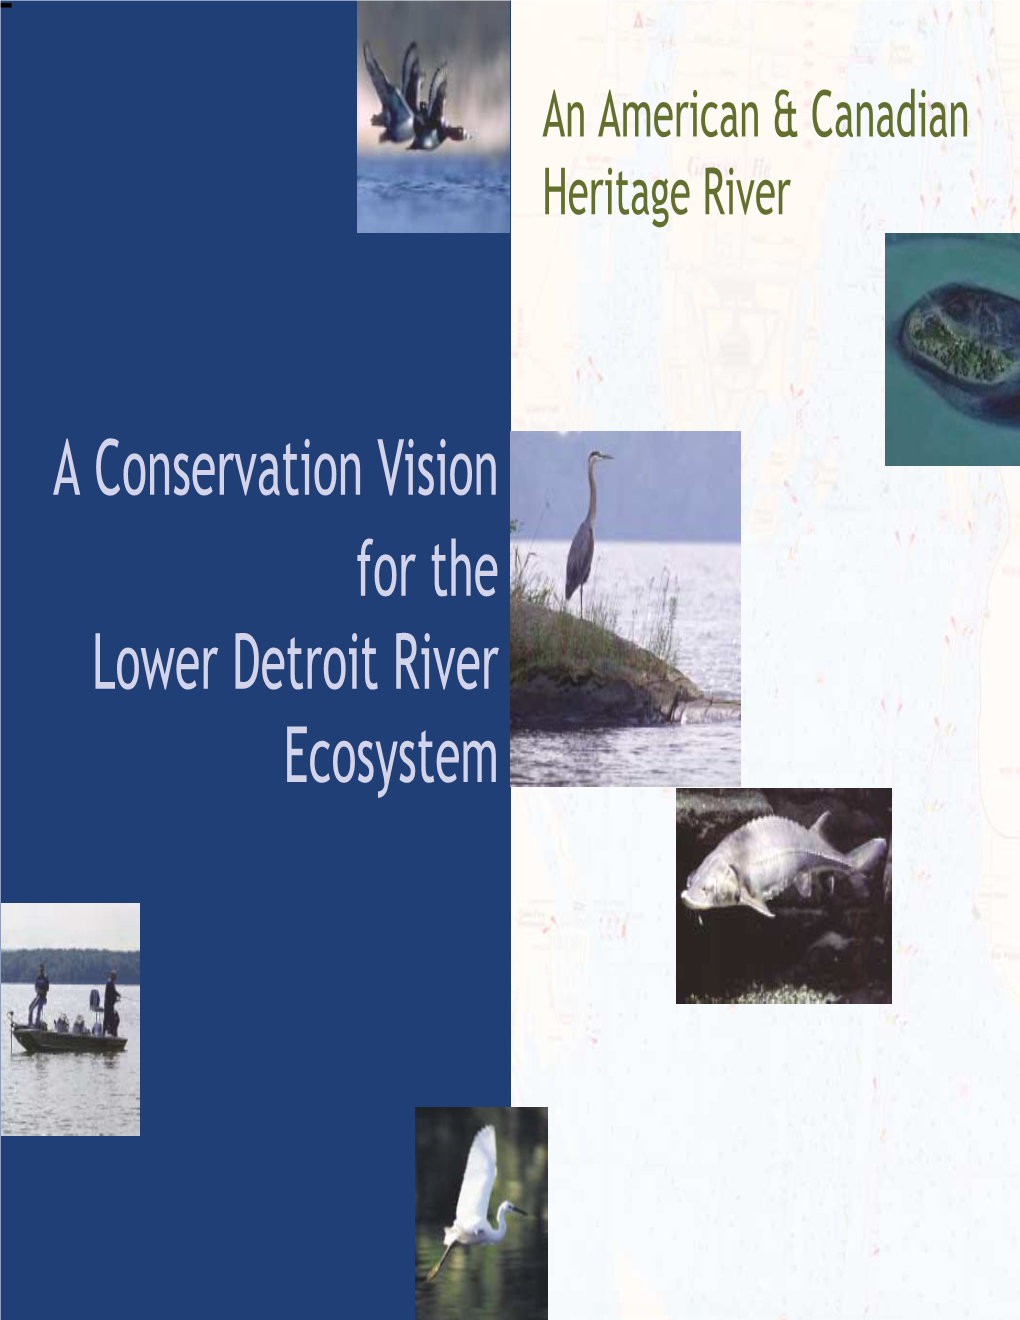 A Conservation Vision for the Lower Detroit River Ecosystem We Are Proud to Present This Binational Conservation Vision for the Lower Detroit River Ecosystem